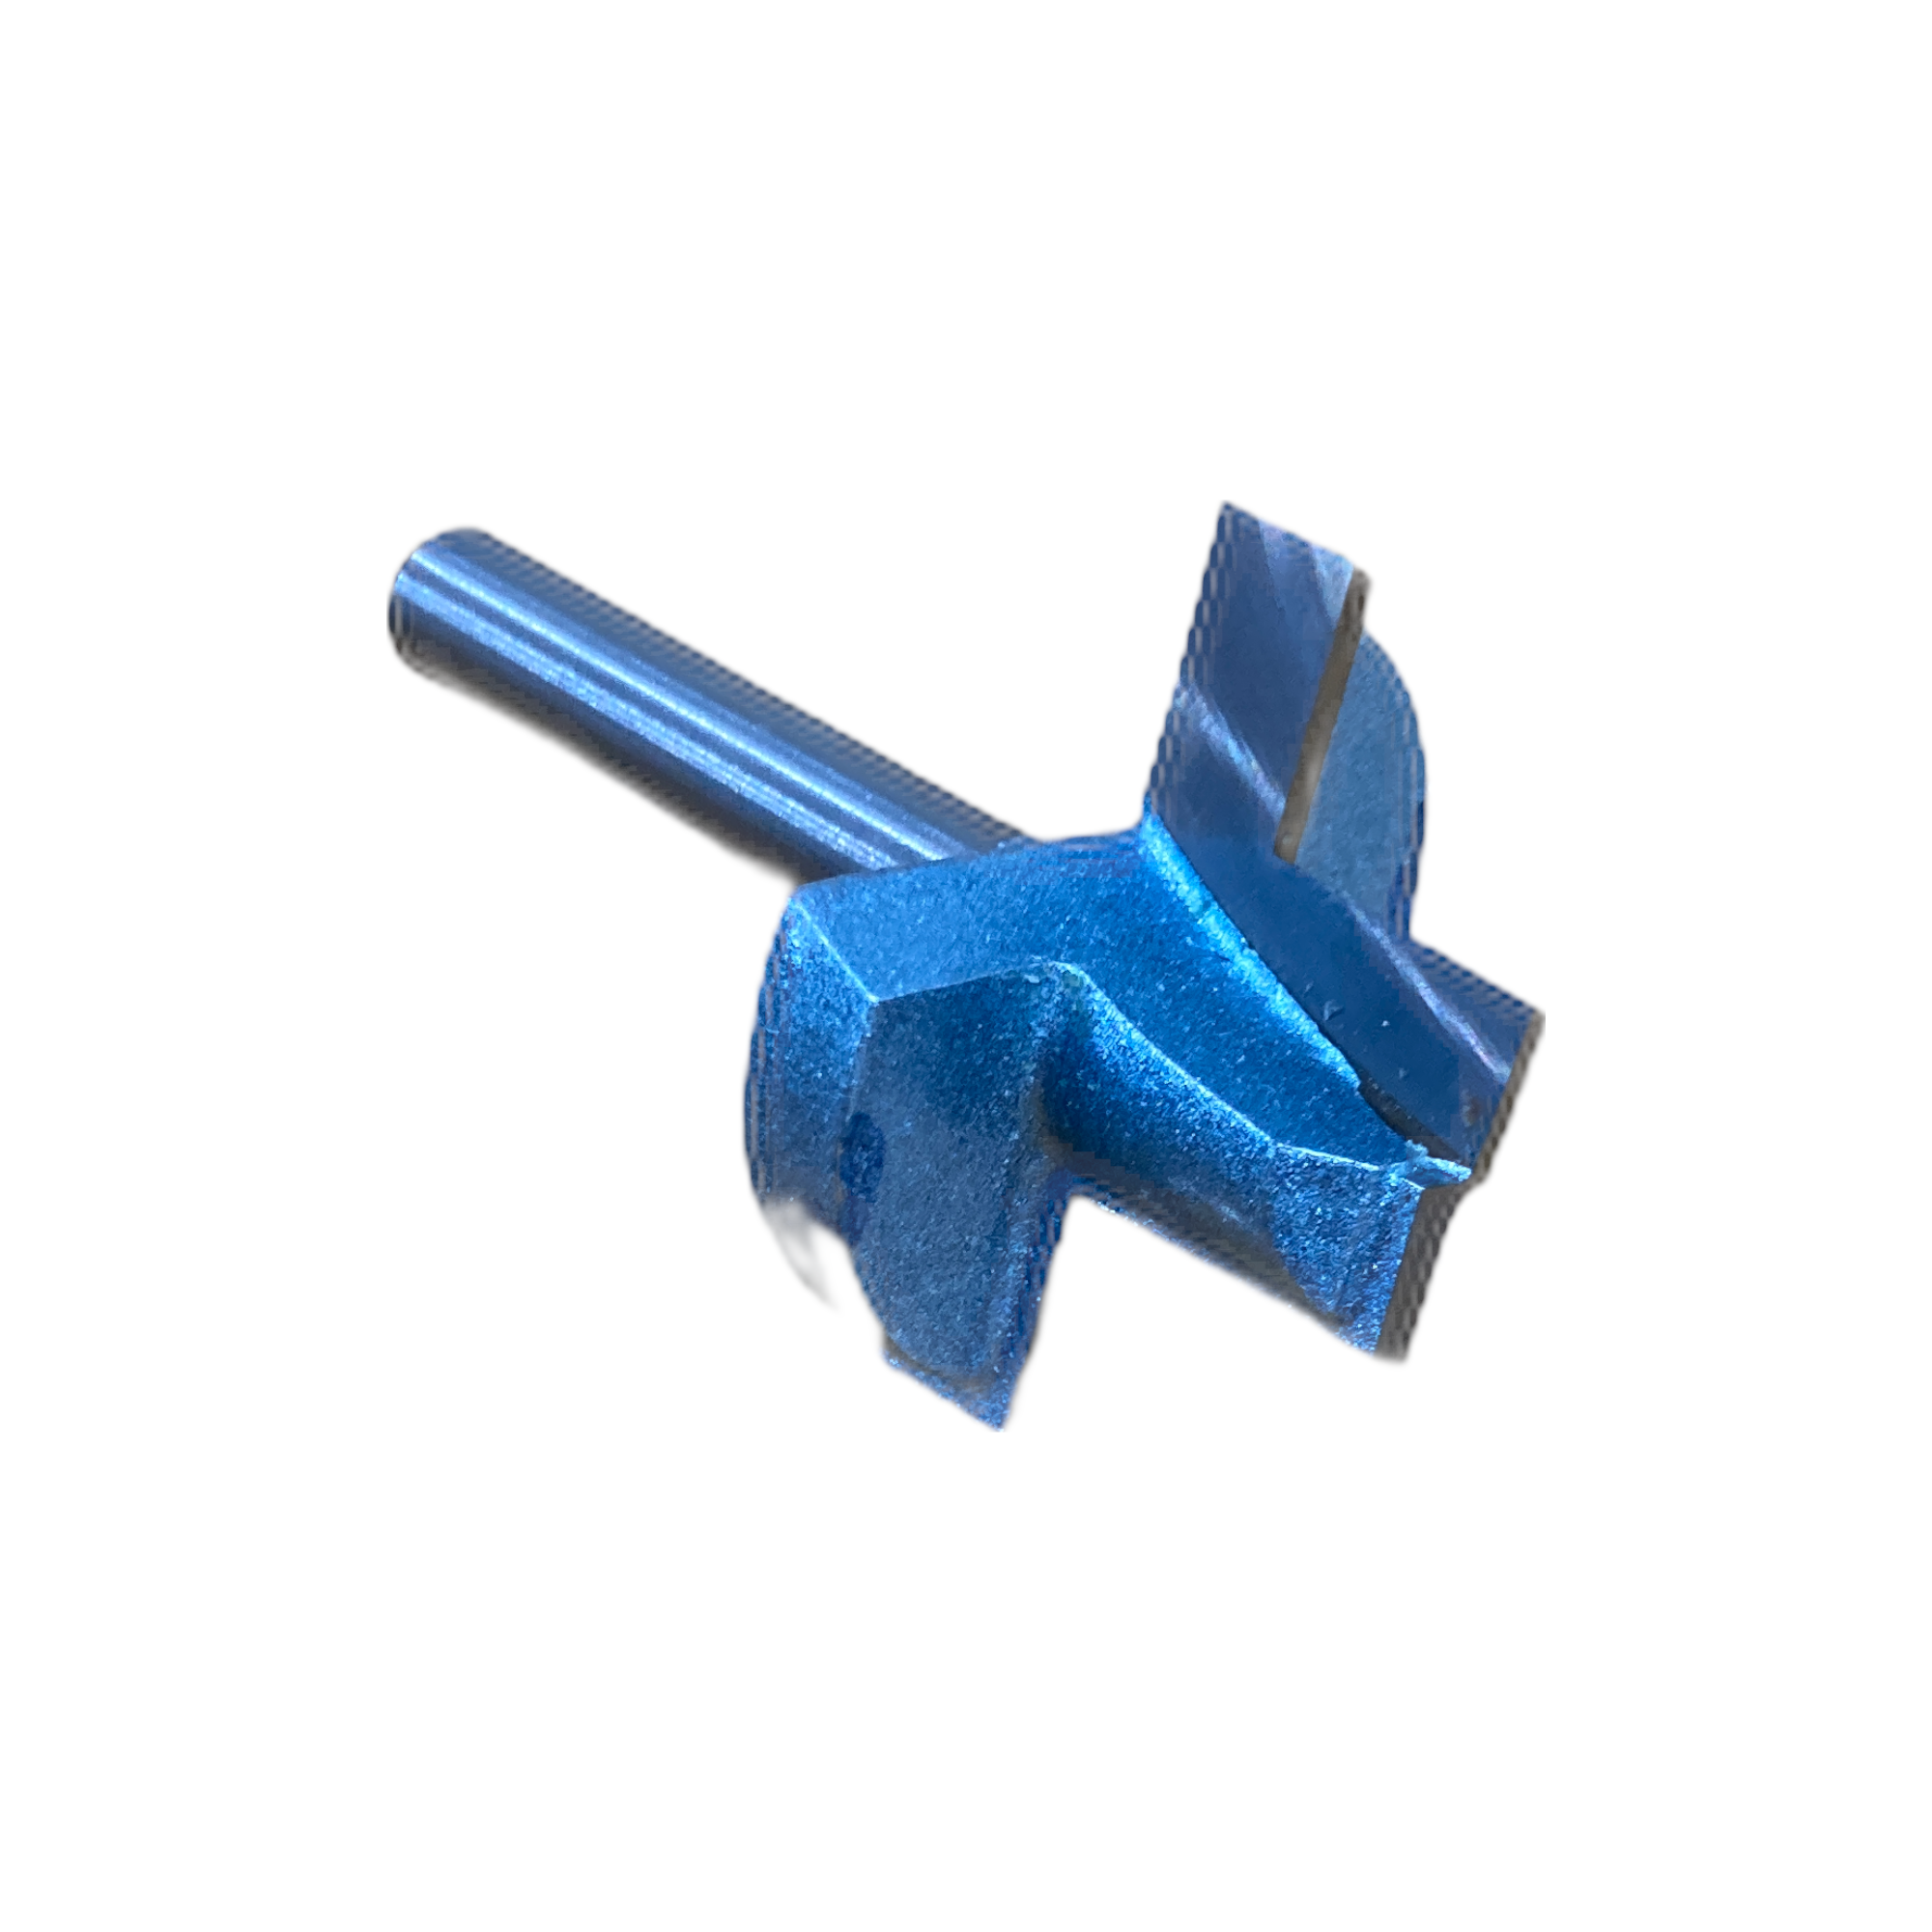 Modii One-pass Cutter Bit size 1/2" (Futures compatible)